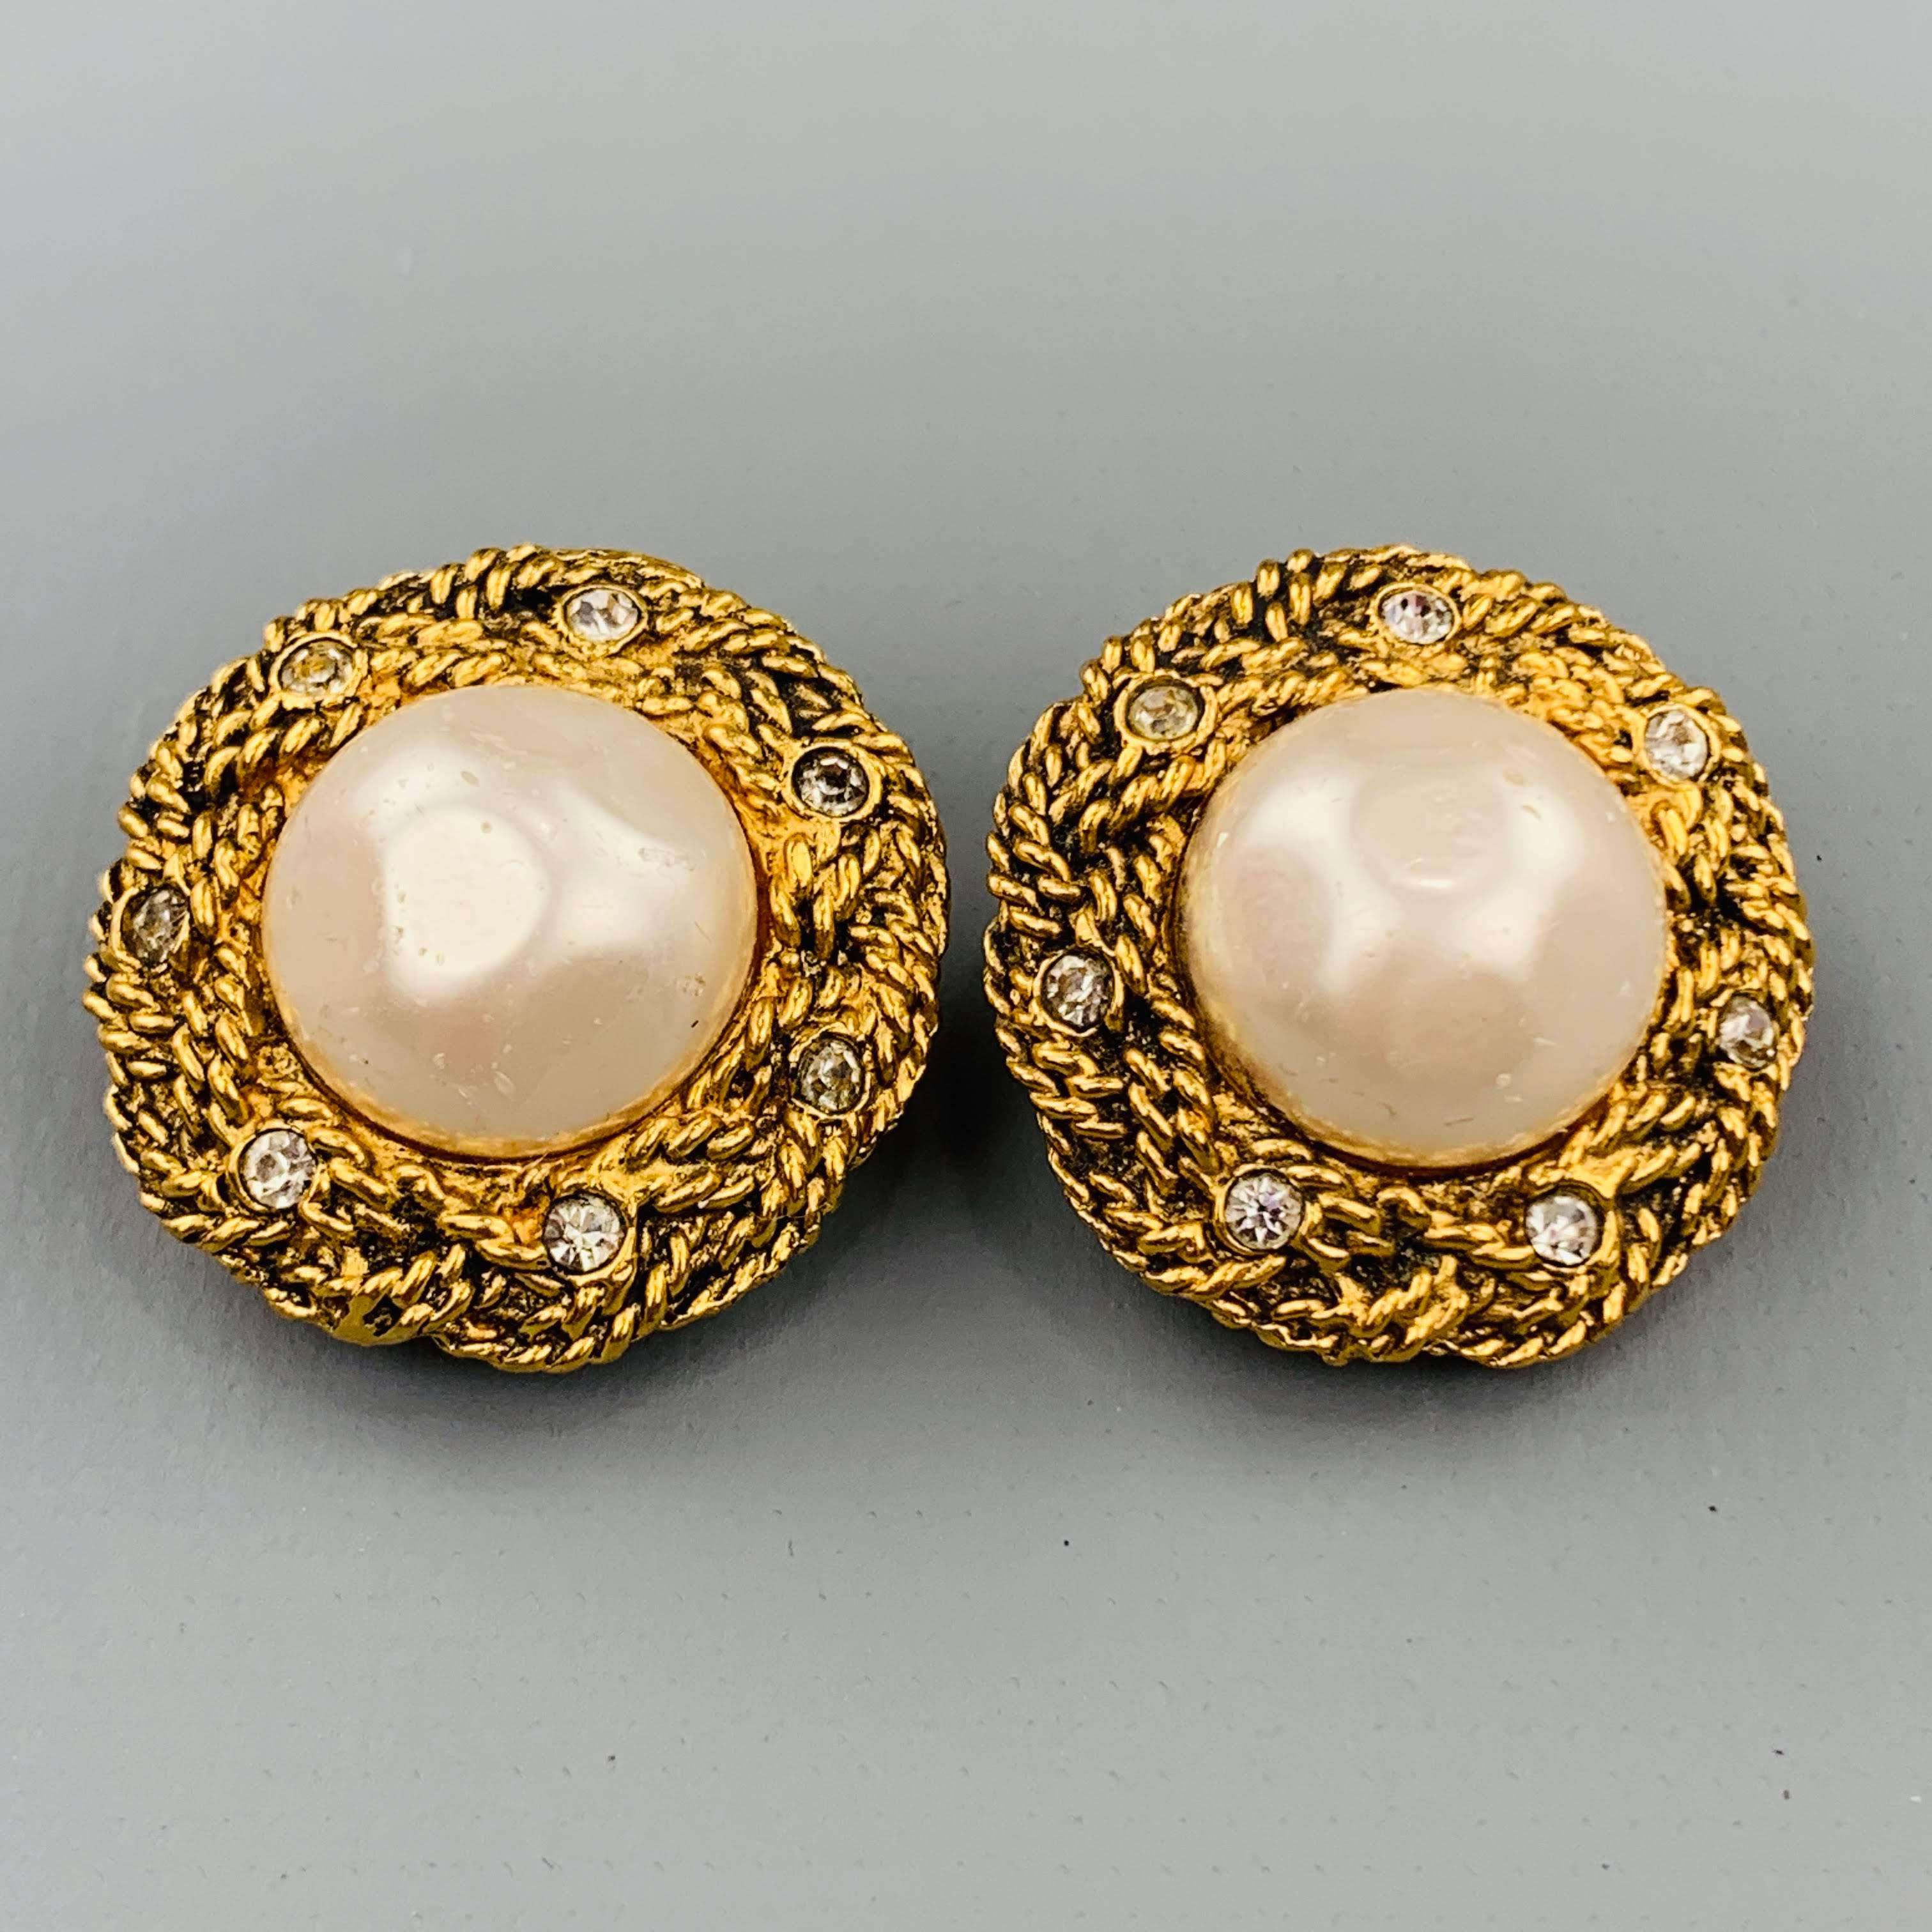 Vintage CHANEL (Circa 1971-1980) round clip on earrings come in a woven textured yellow gold tone metal with rhinestones and faux pearl center.
 
Very Good Pre-Owned Condition.
 
2.5 cm.